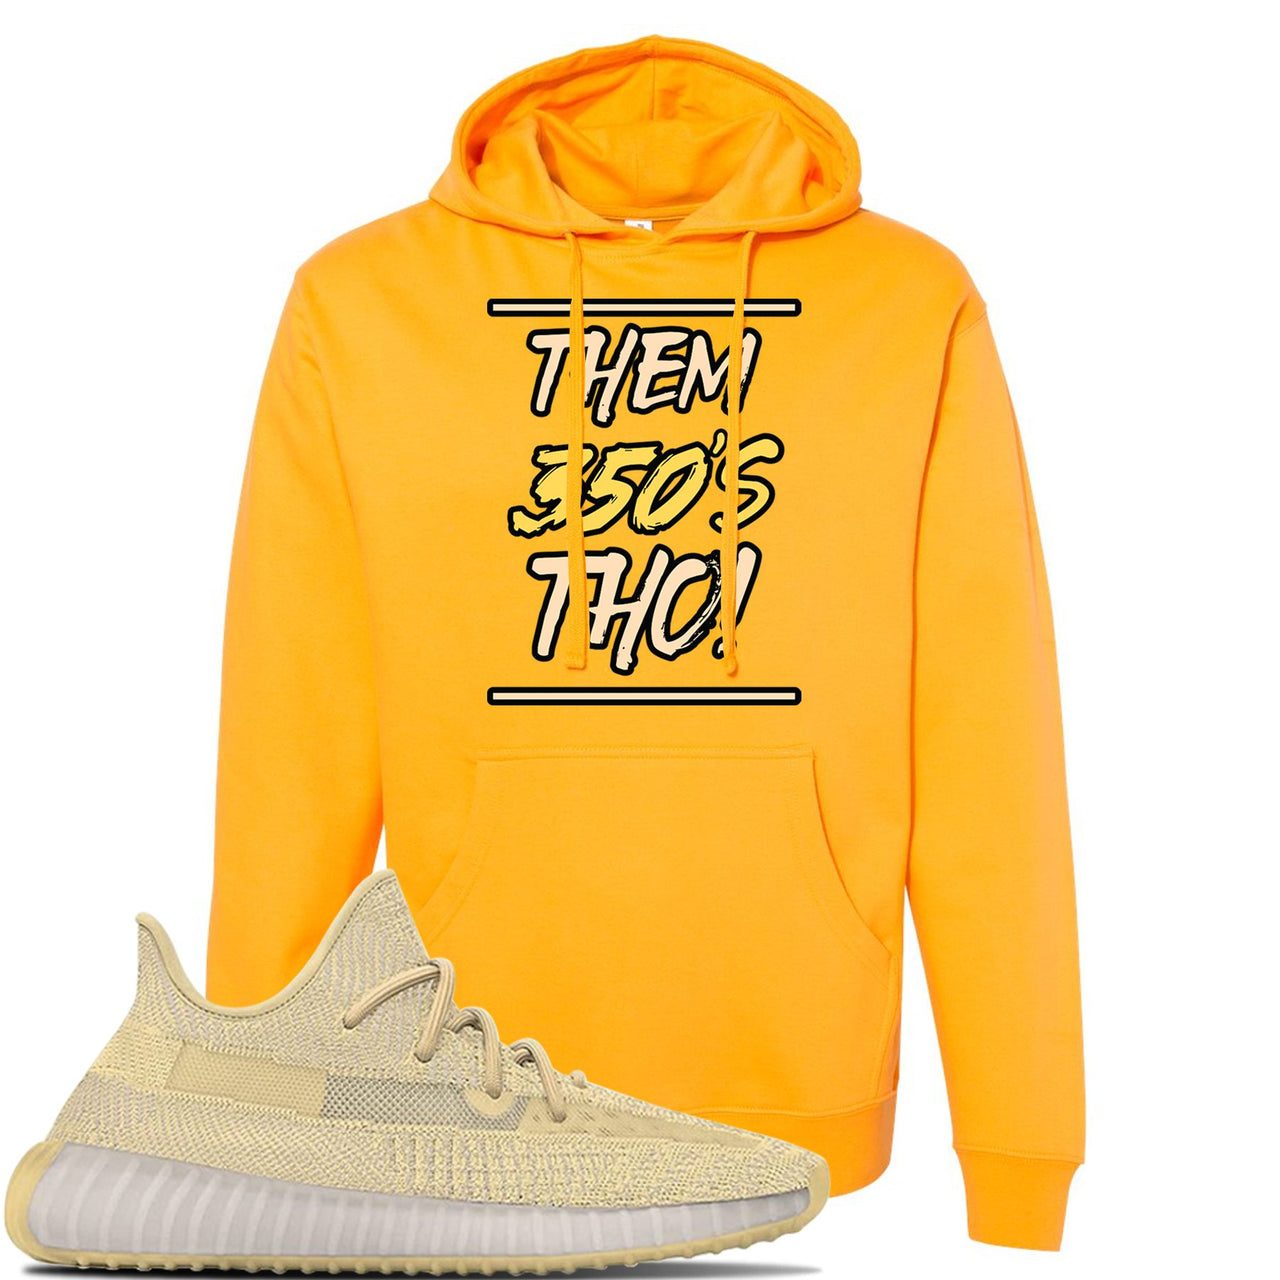 Flax v2 350s Hoodie | Them 350's Tho, Gold